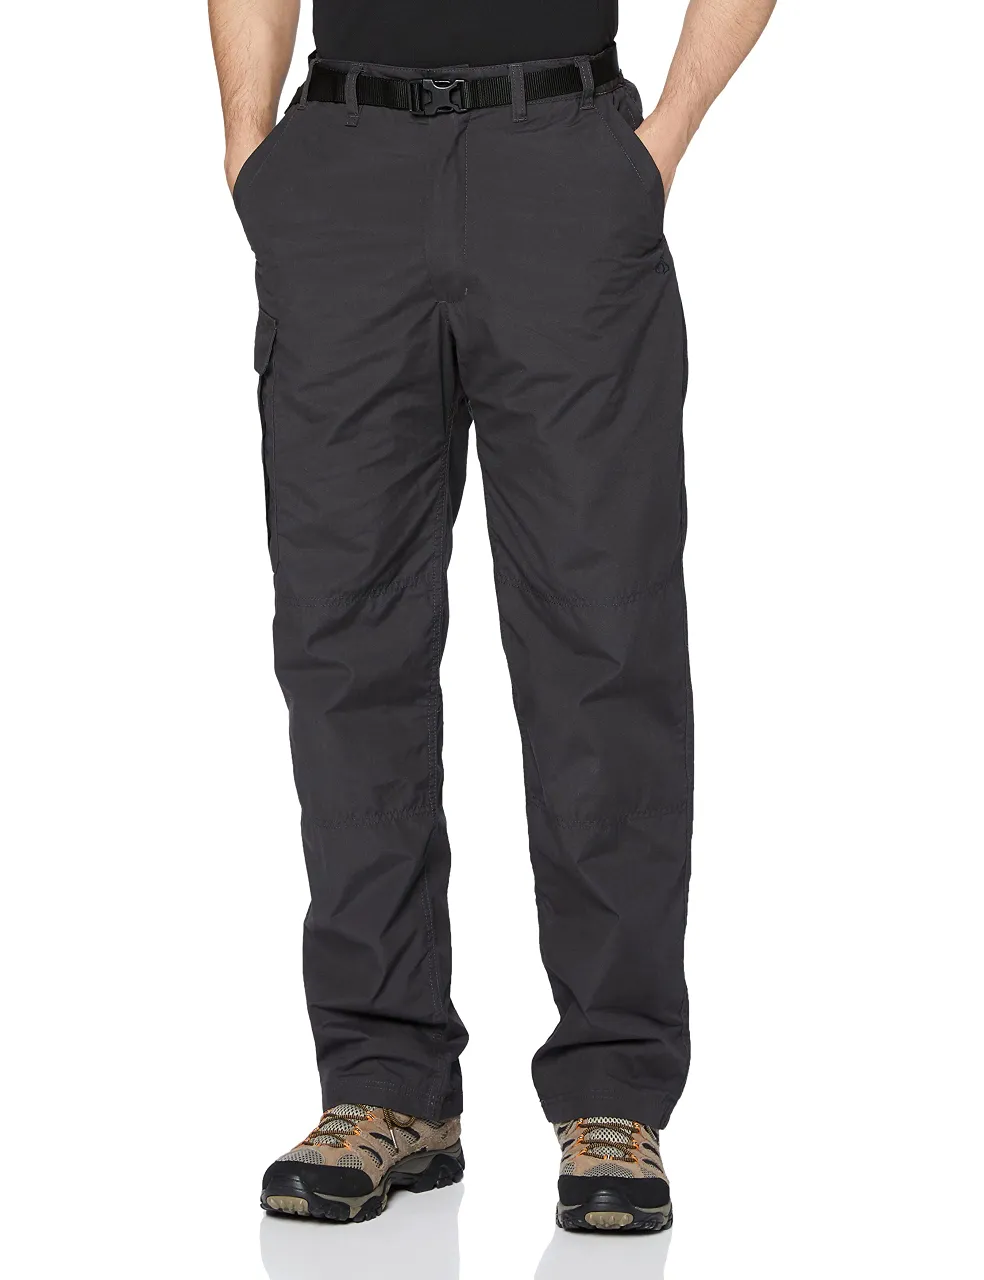 Craghoppers Kiwi Mens Winter Lined Trousers Black Pepper 38S